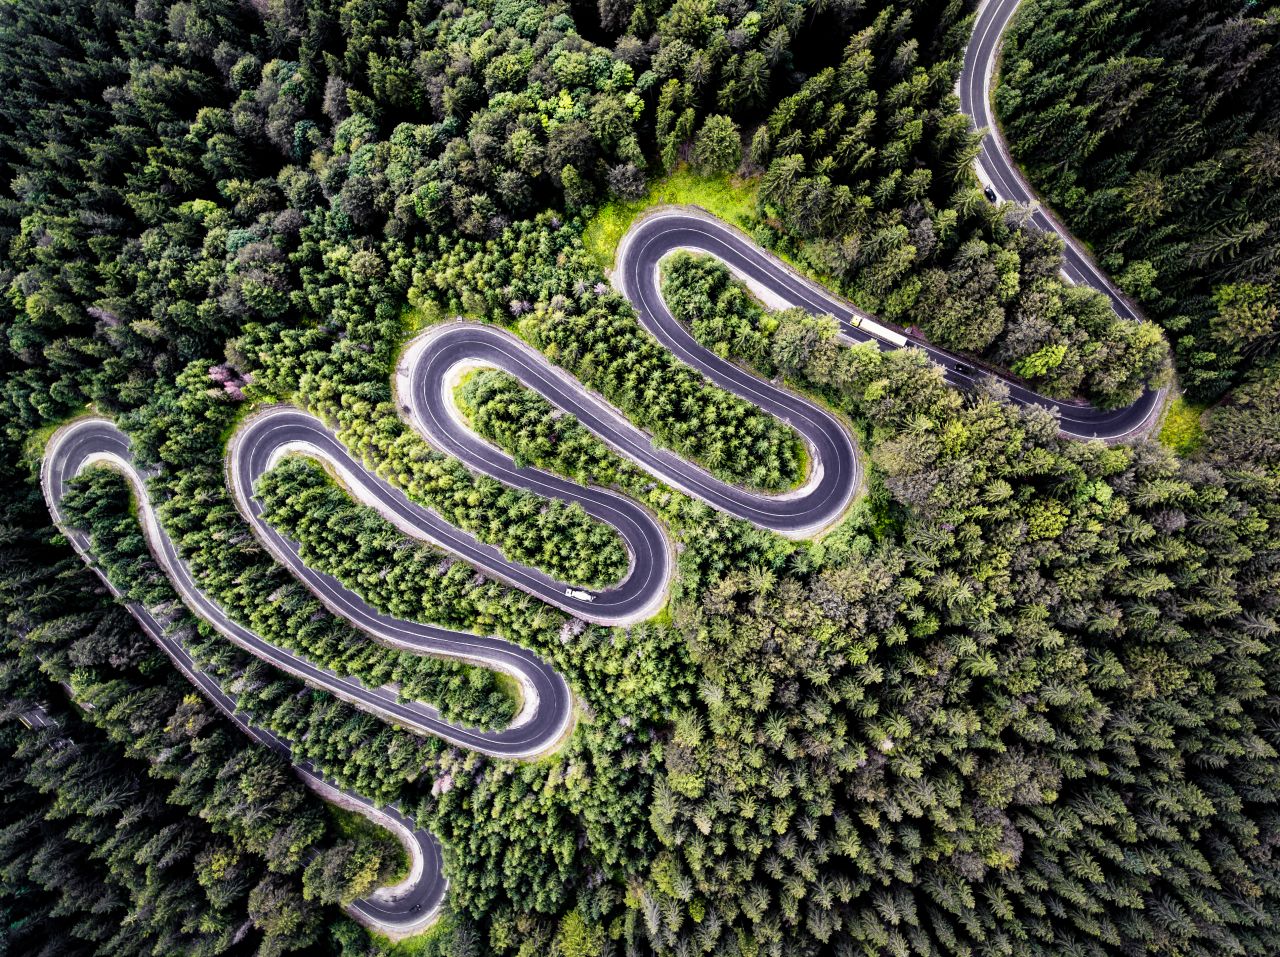 <strong>Vampire view:</strong> Second prize in the nature category went to Calin Stan, who photographed the winding road to Transylvania. "As the legend says, this is the view that Count Dracula himself saw on his nocturnal flight," says Stan. "I love nature and shooting in nature."